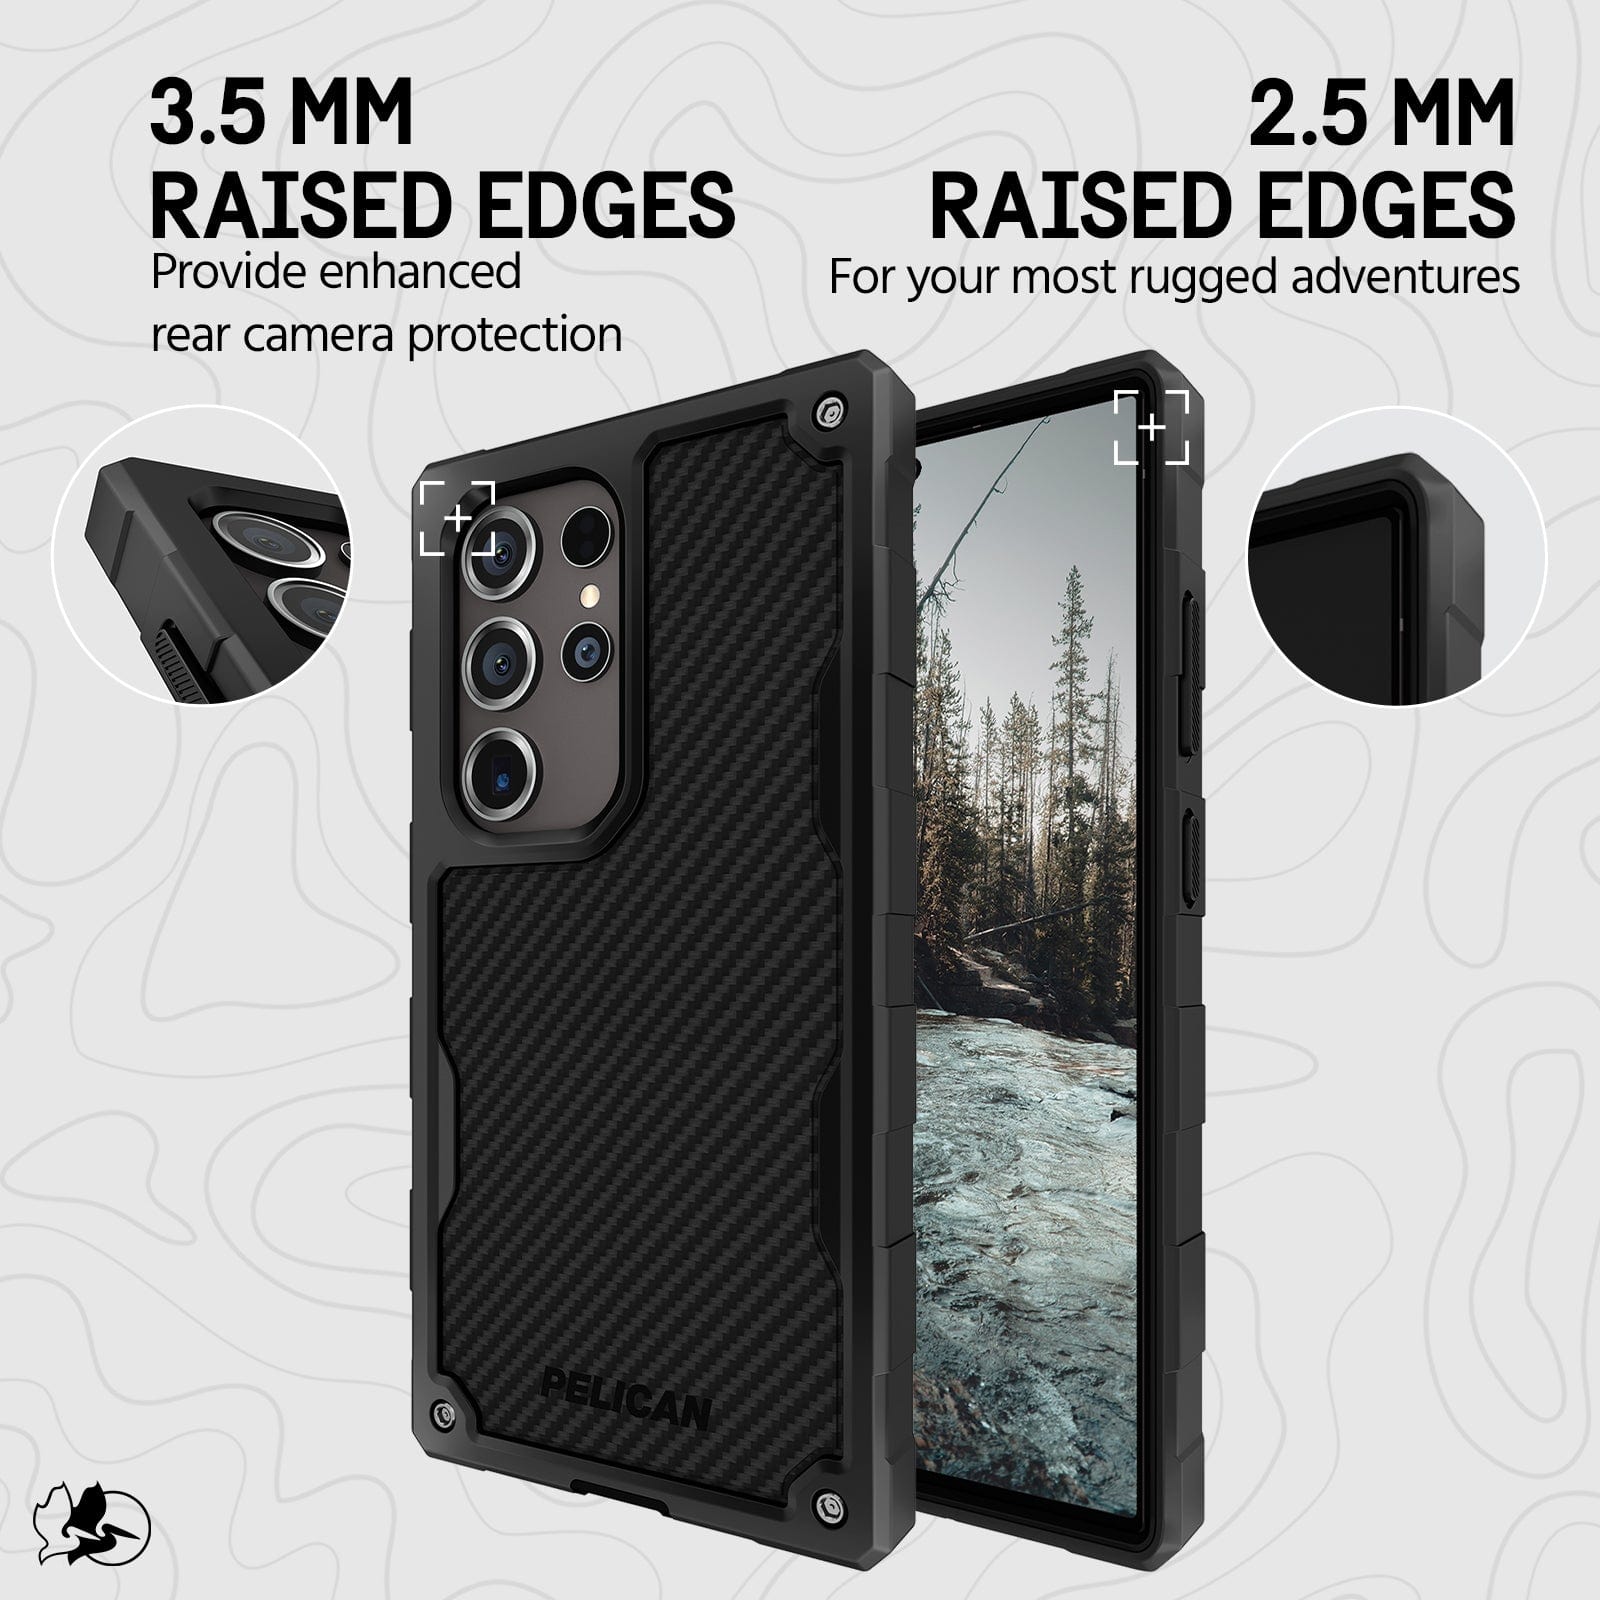 3.5MM RAISED EDGES PROVIDE ENHANCED REAR CAMERA PROTECTION. 2.5MM RAISED EDGES FOR YOUR MOST RUGGED ADVENTURES